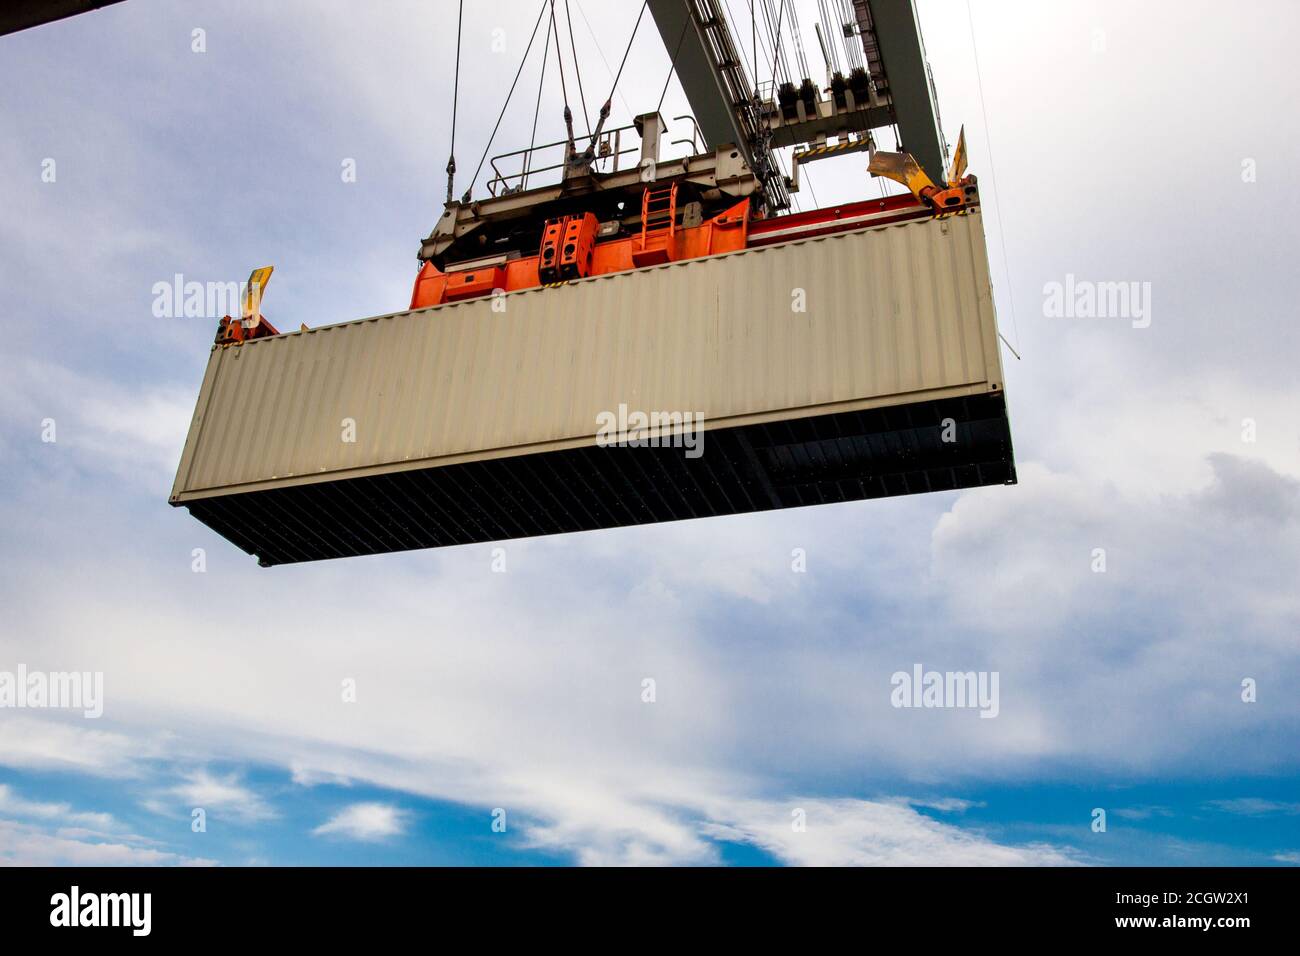 Cargo shipping container lifted by a gantry crane in a industrial shipping terminal in a port. Stock Photo